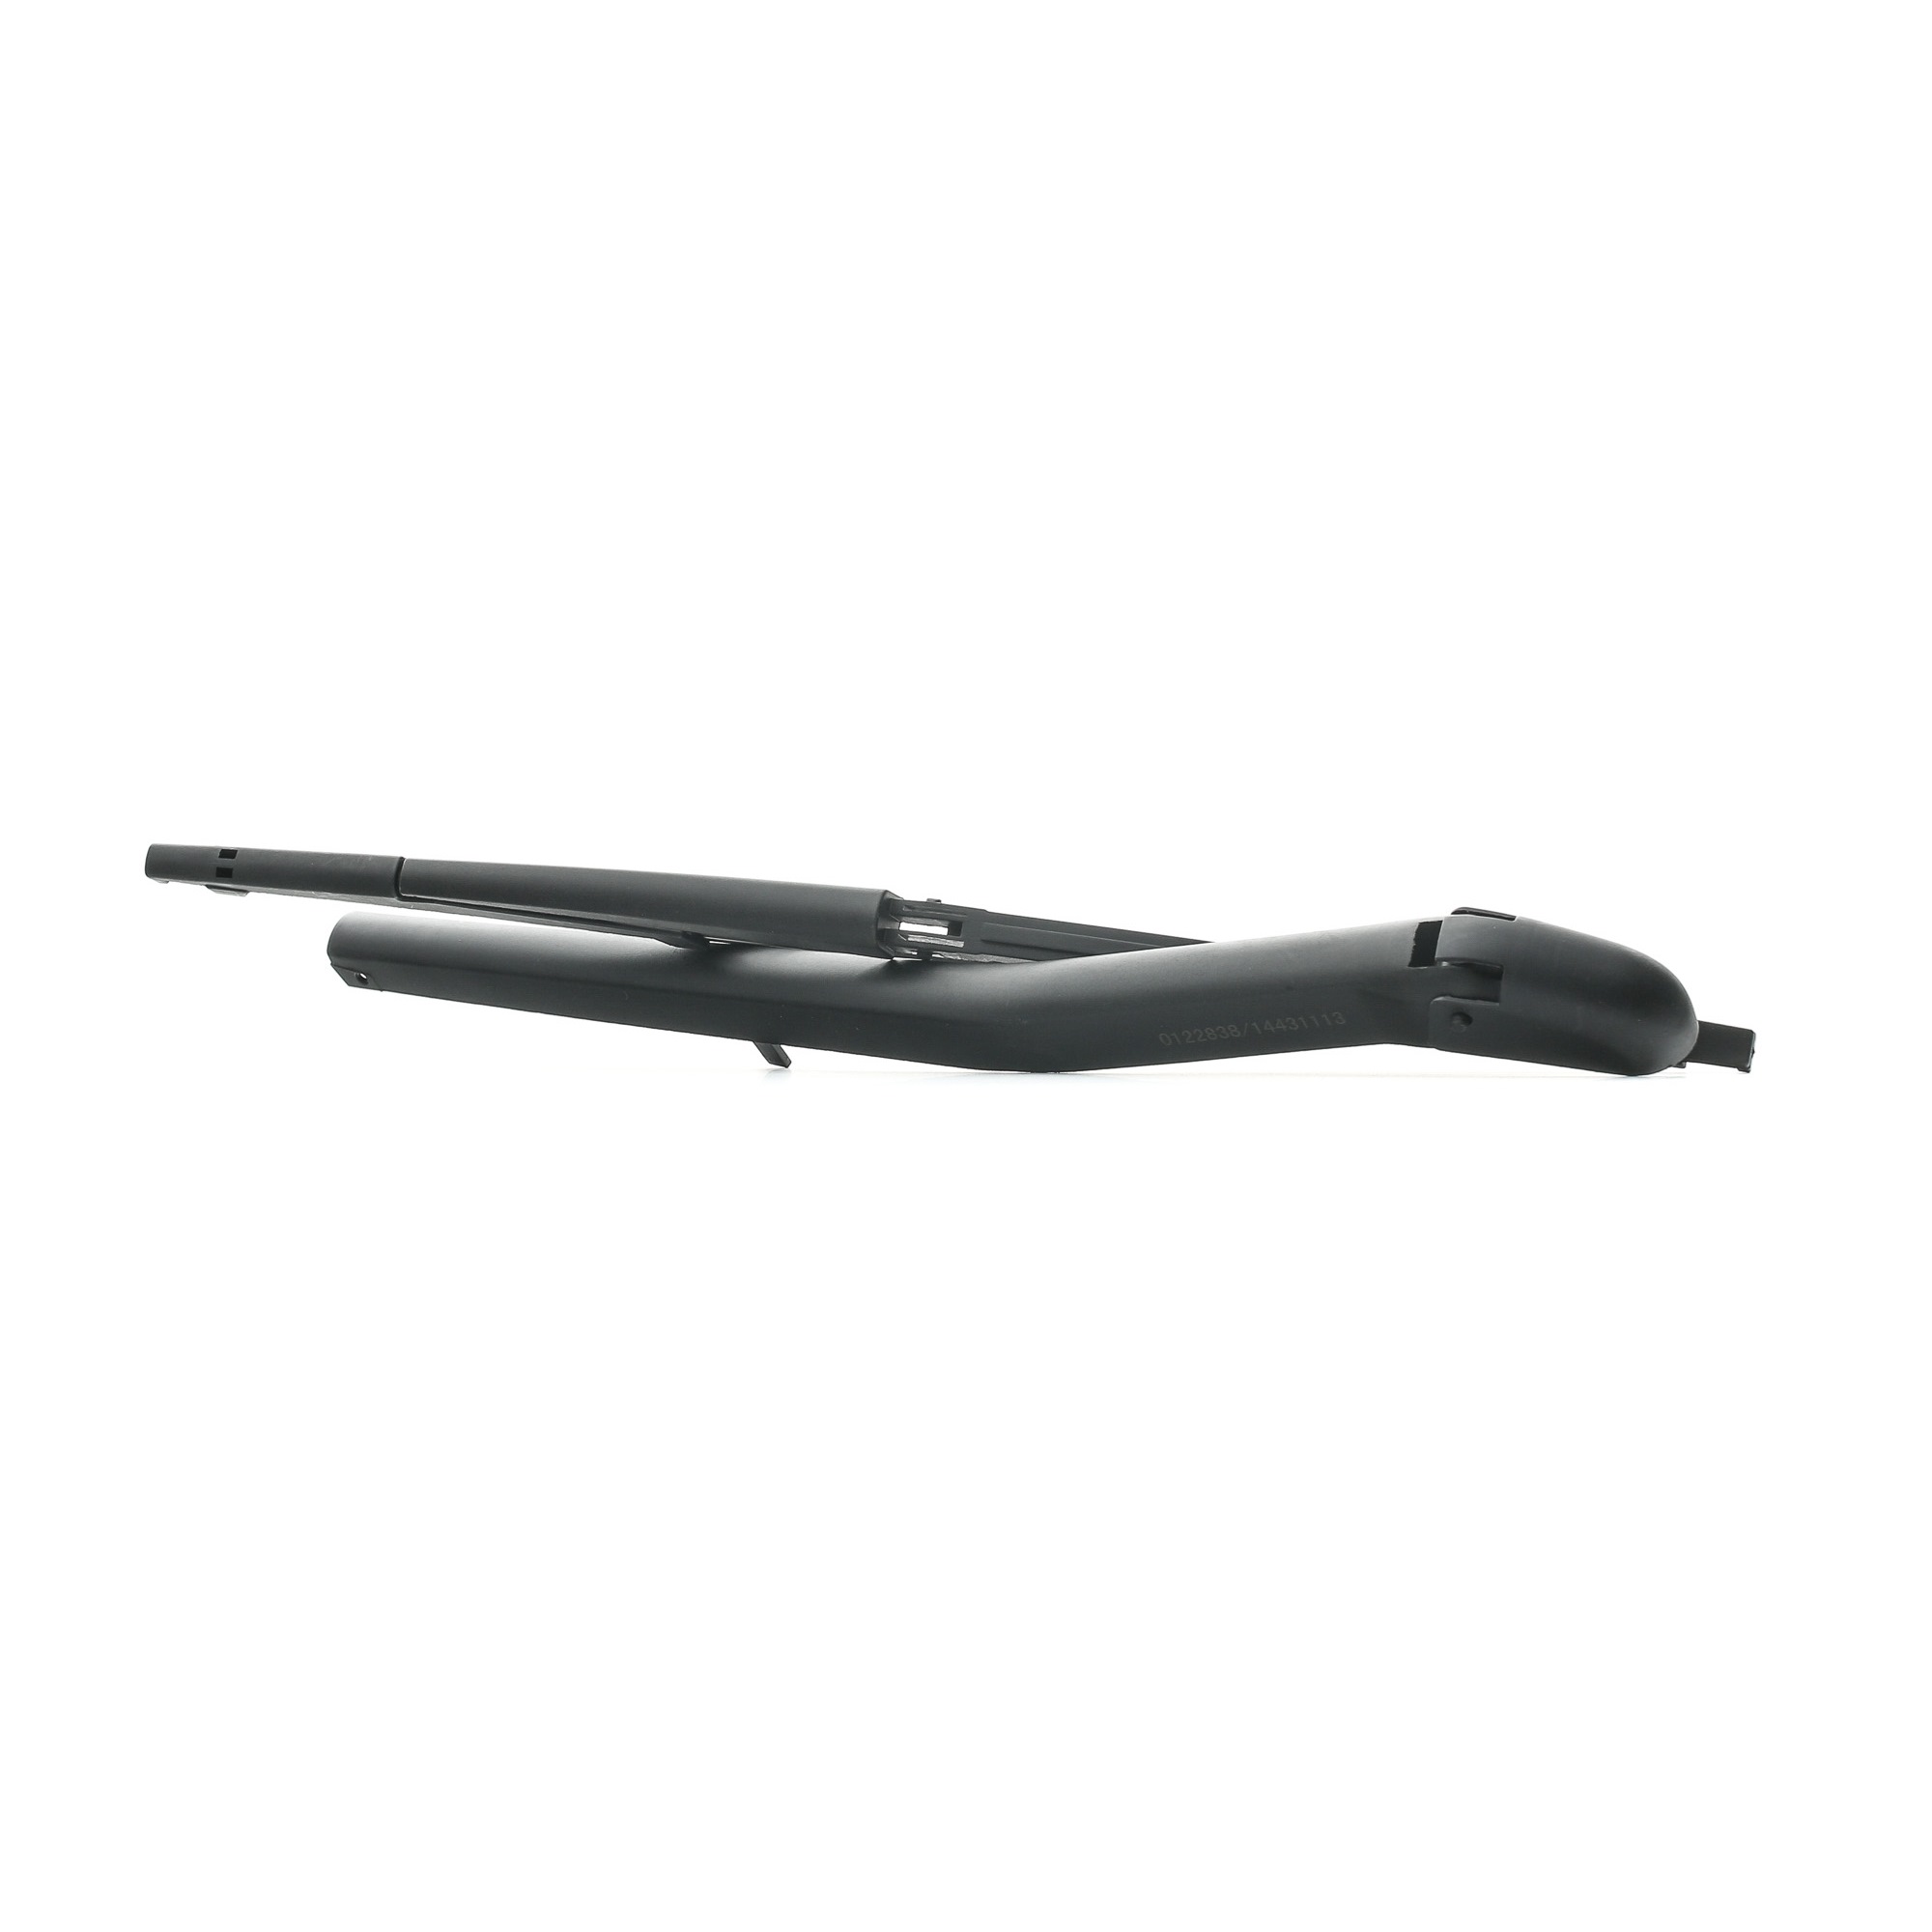 STARK SKWA-0930090 Wiper Arm, windscreen washer Rear, with integrated wiper blade, with cap